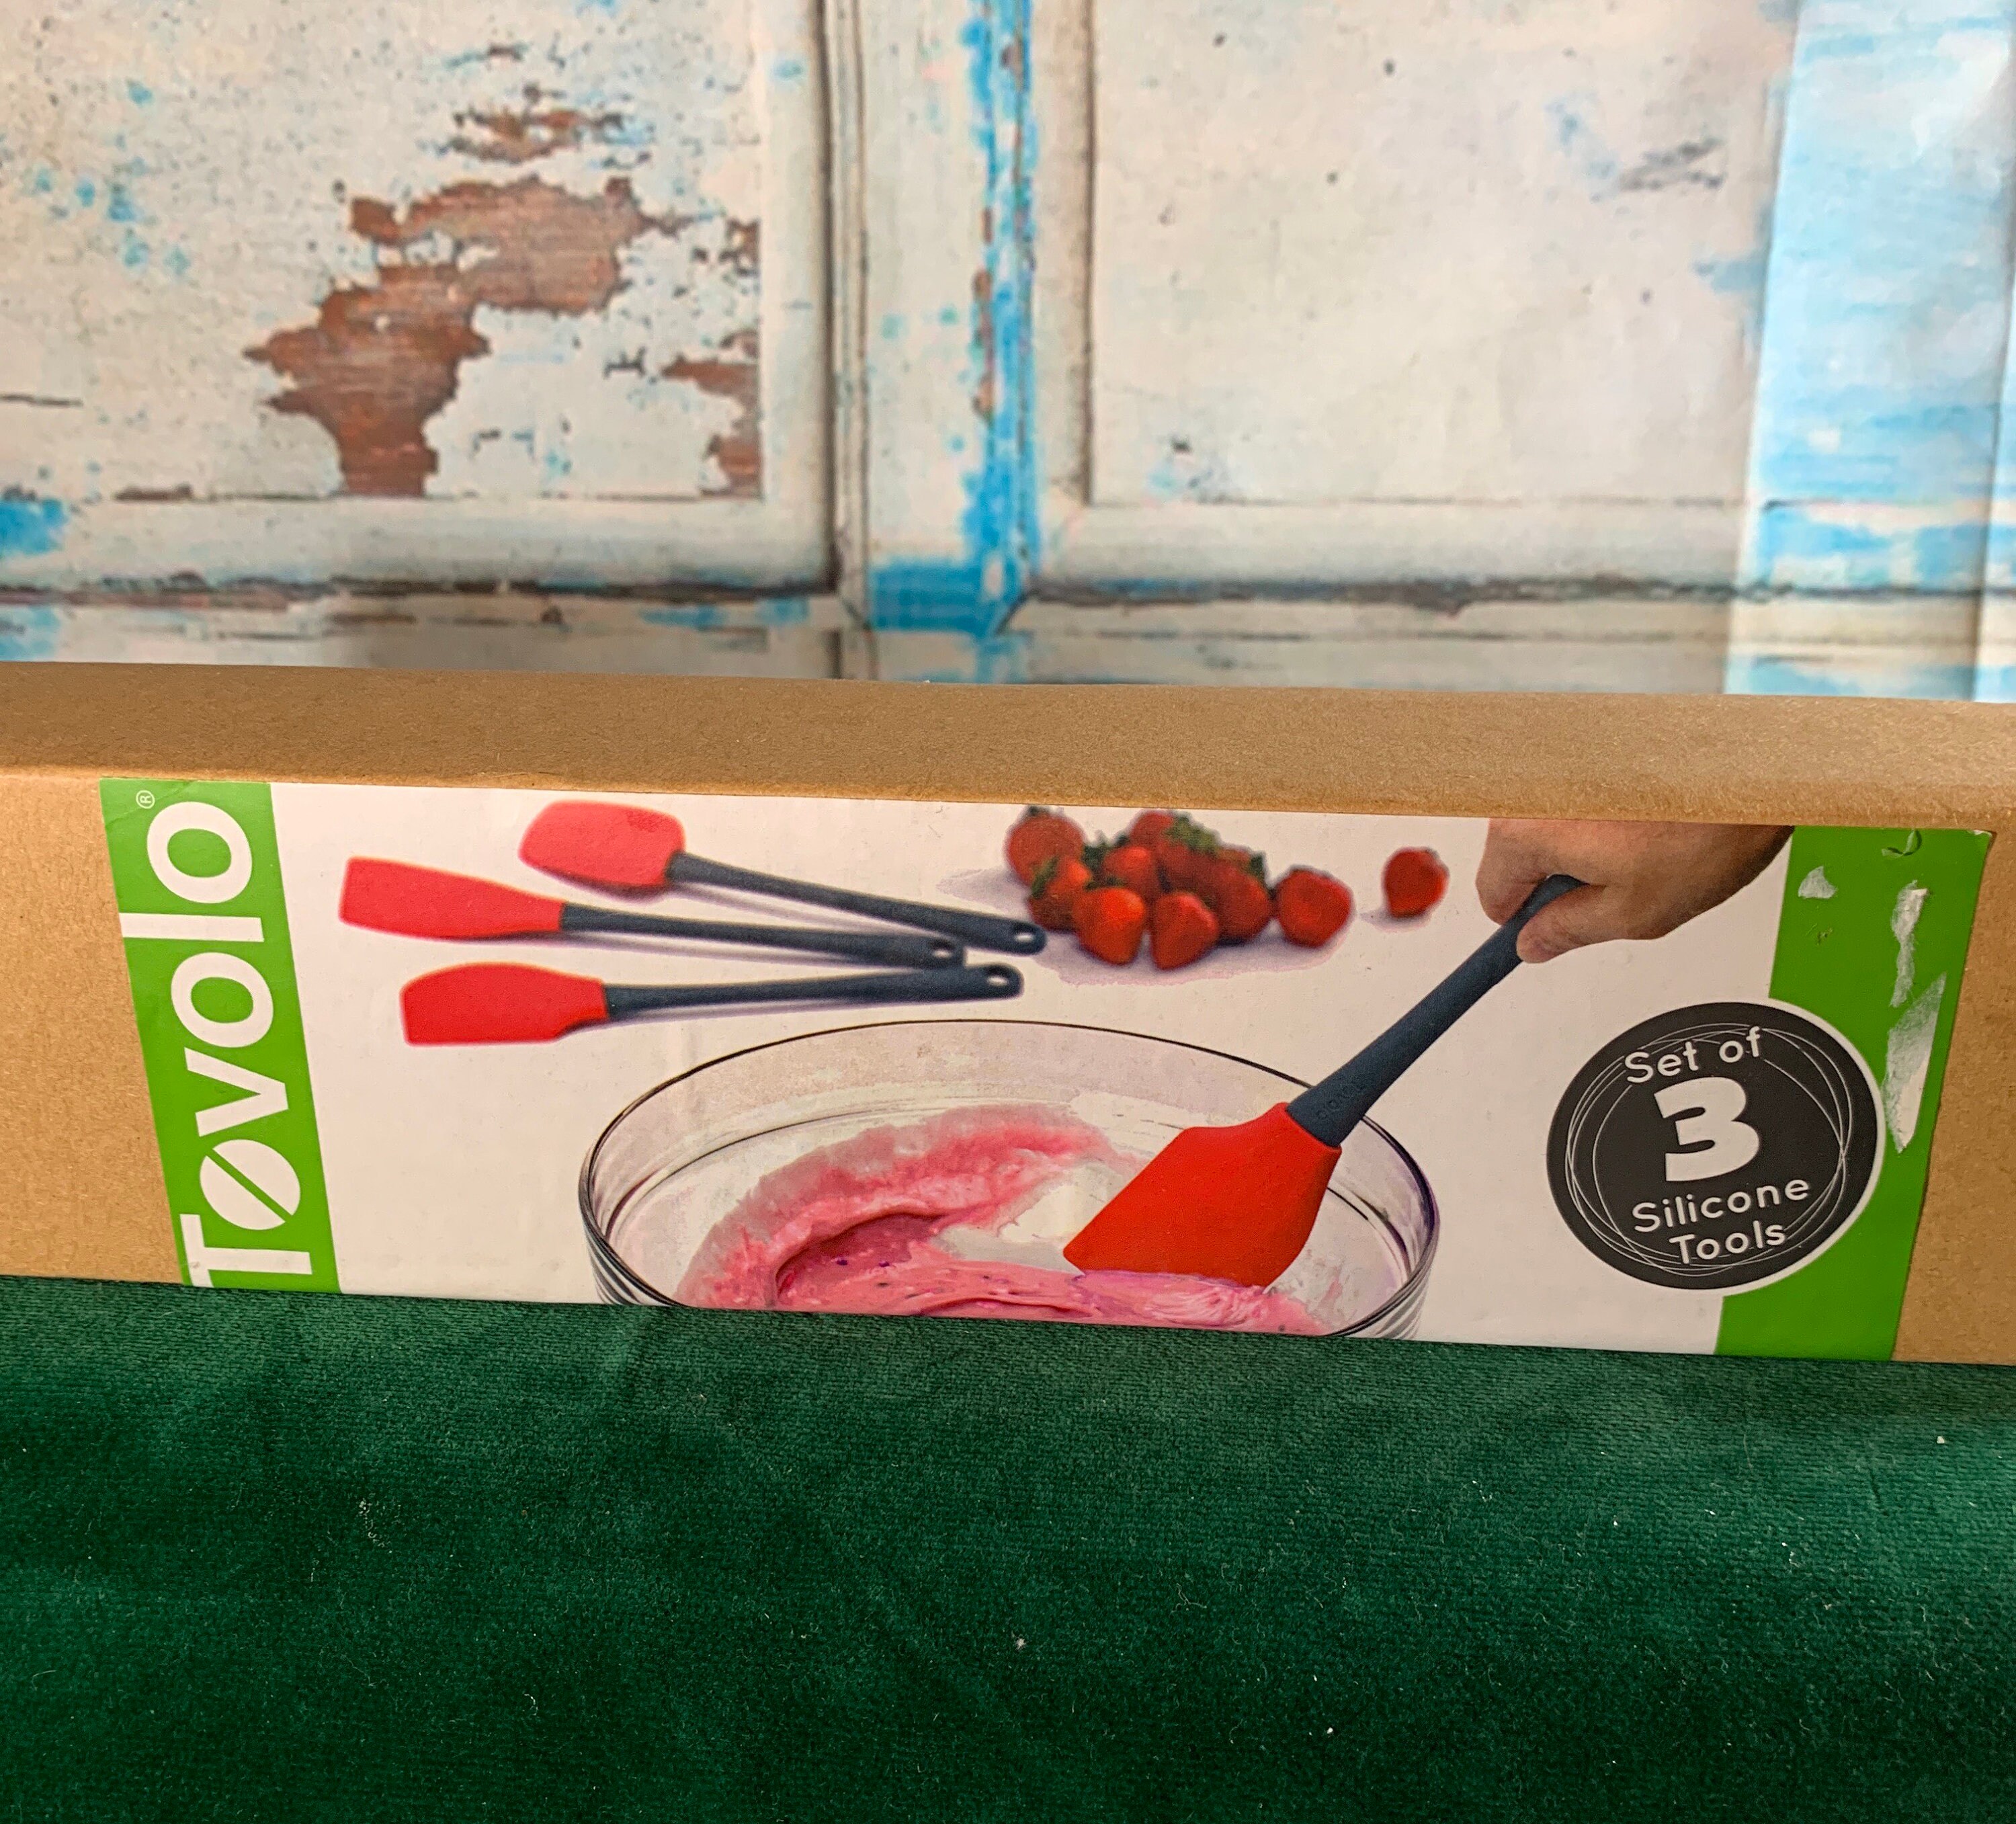 Tovolo Set of Three Silicone Vintage Tools NEW in Original Box in Excellent  Condition 